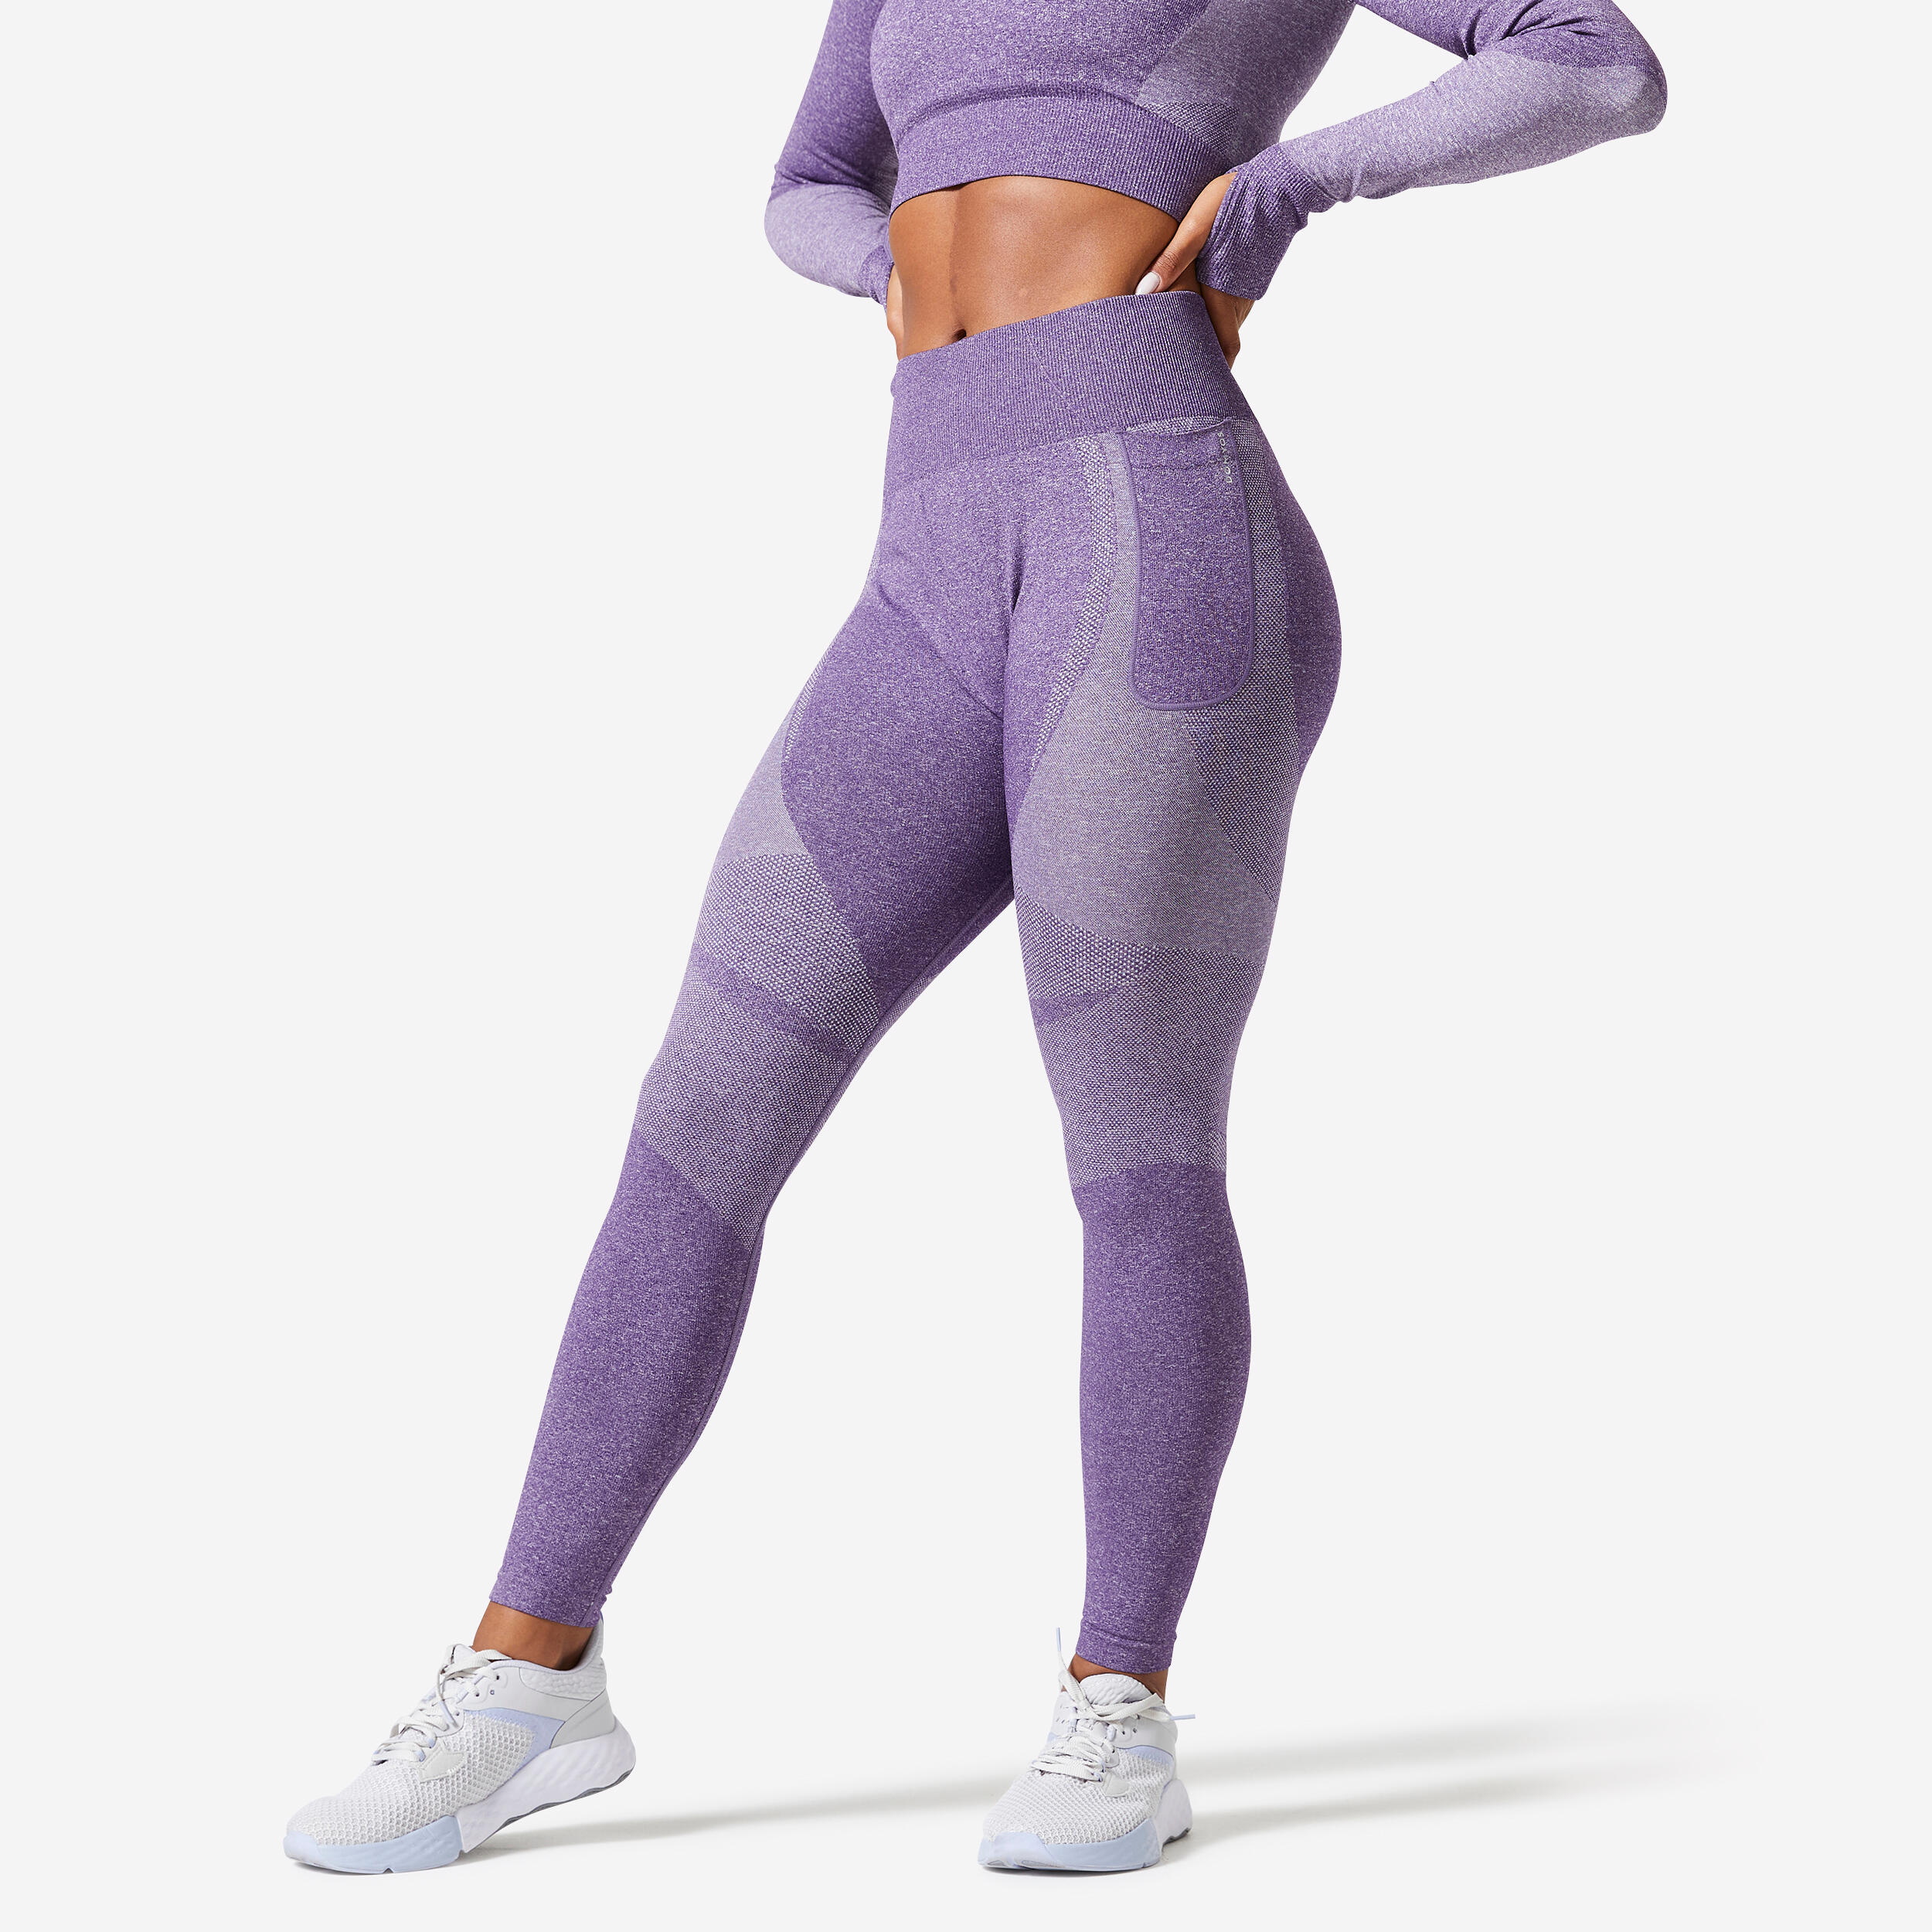 Discover more than 128 purple workout leggings latest